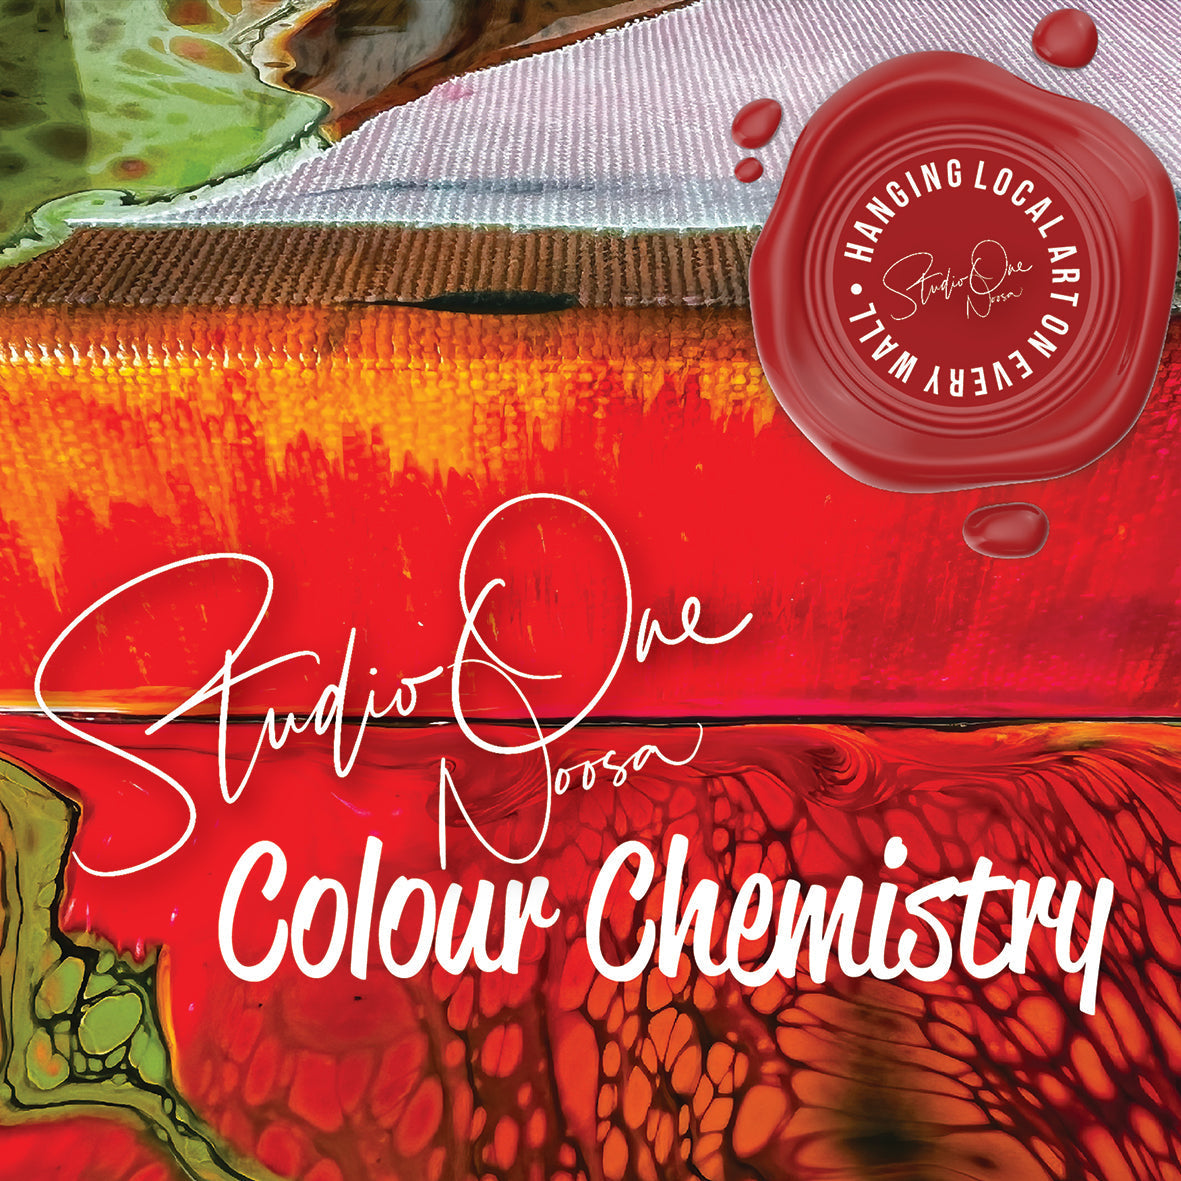 23rd February 24 - Sip & Pour  - Colour Chemistry Workshop - 5:30PM to 8:00PM